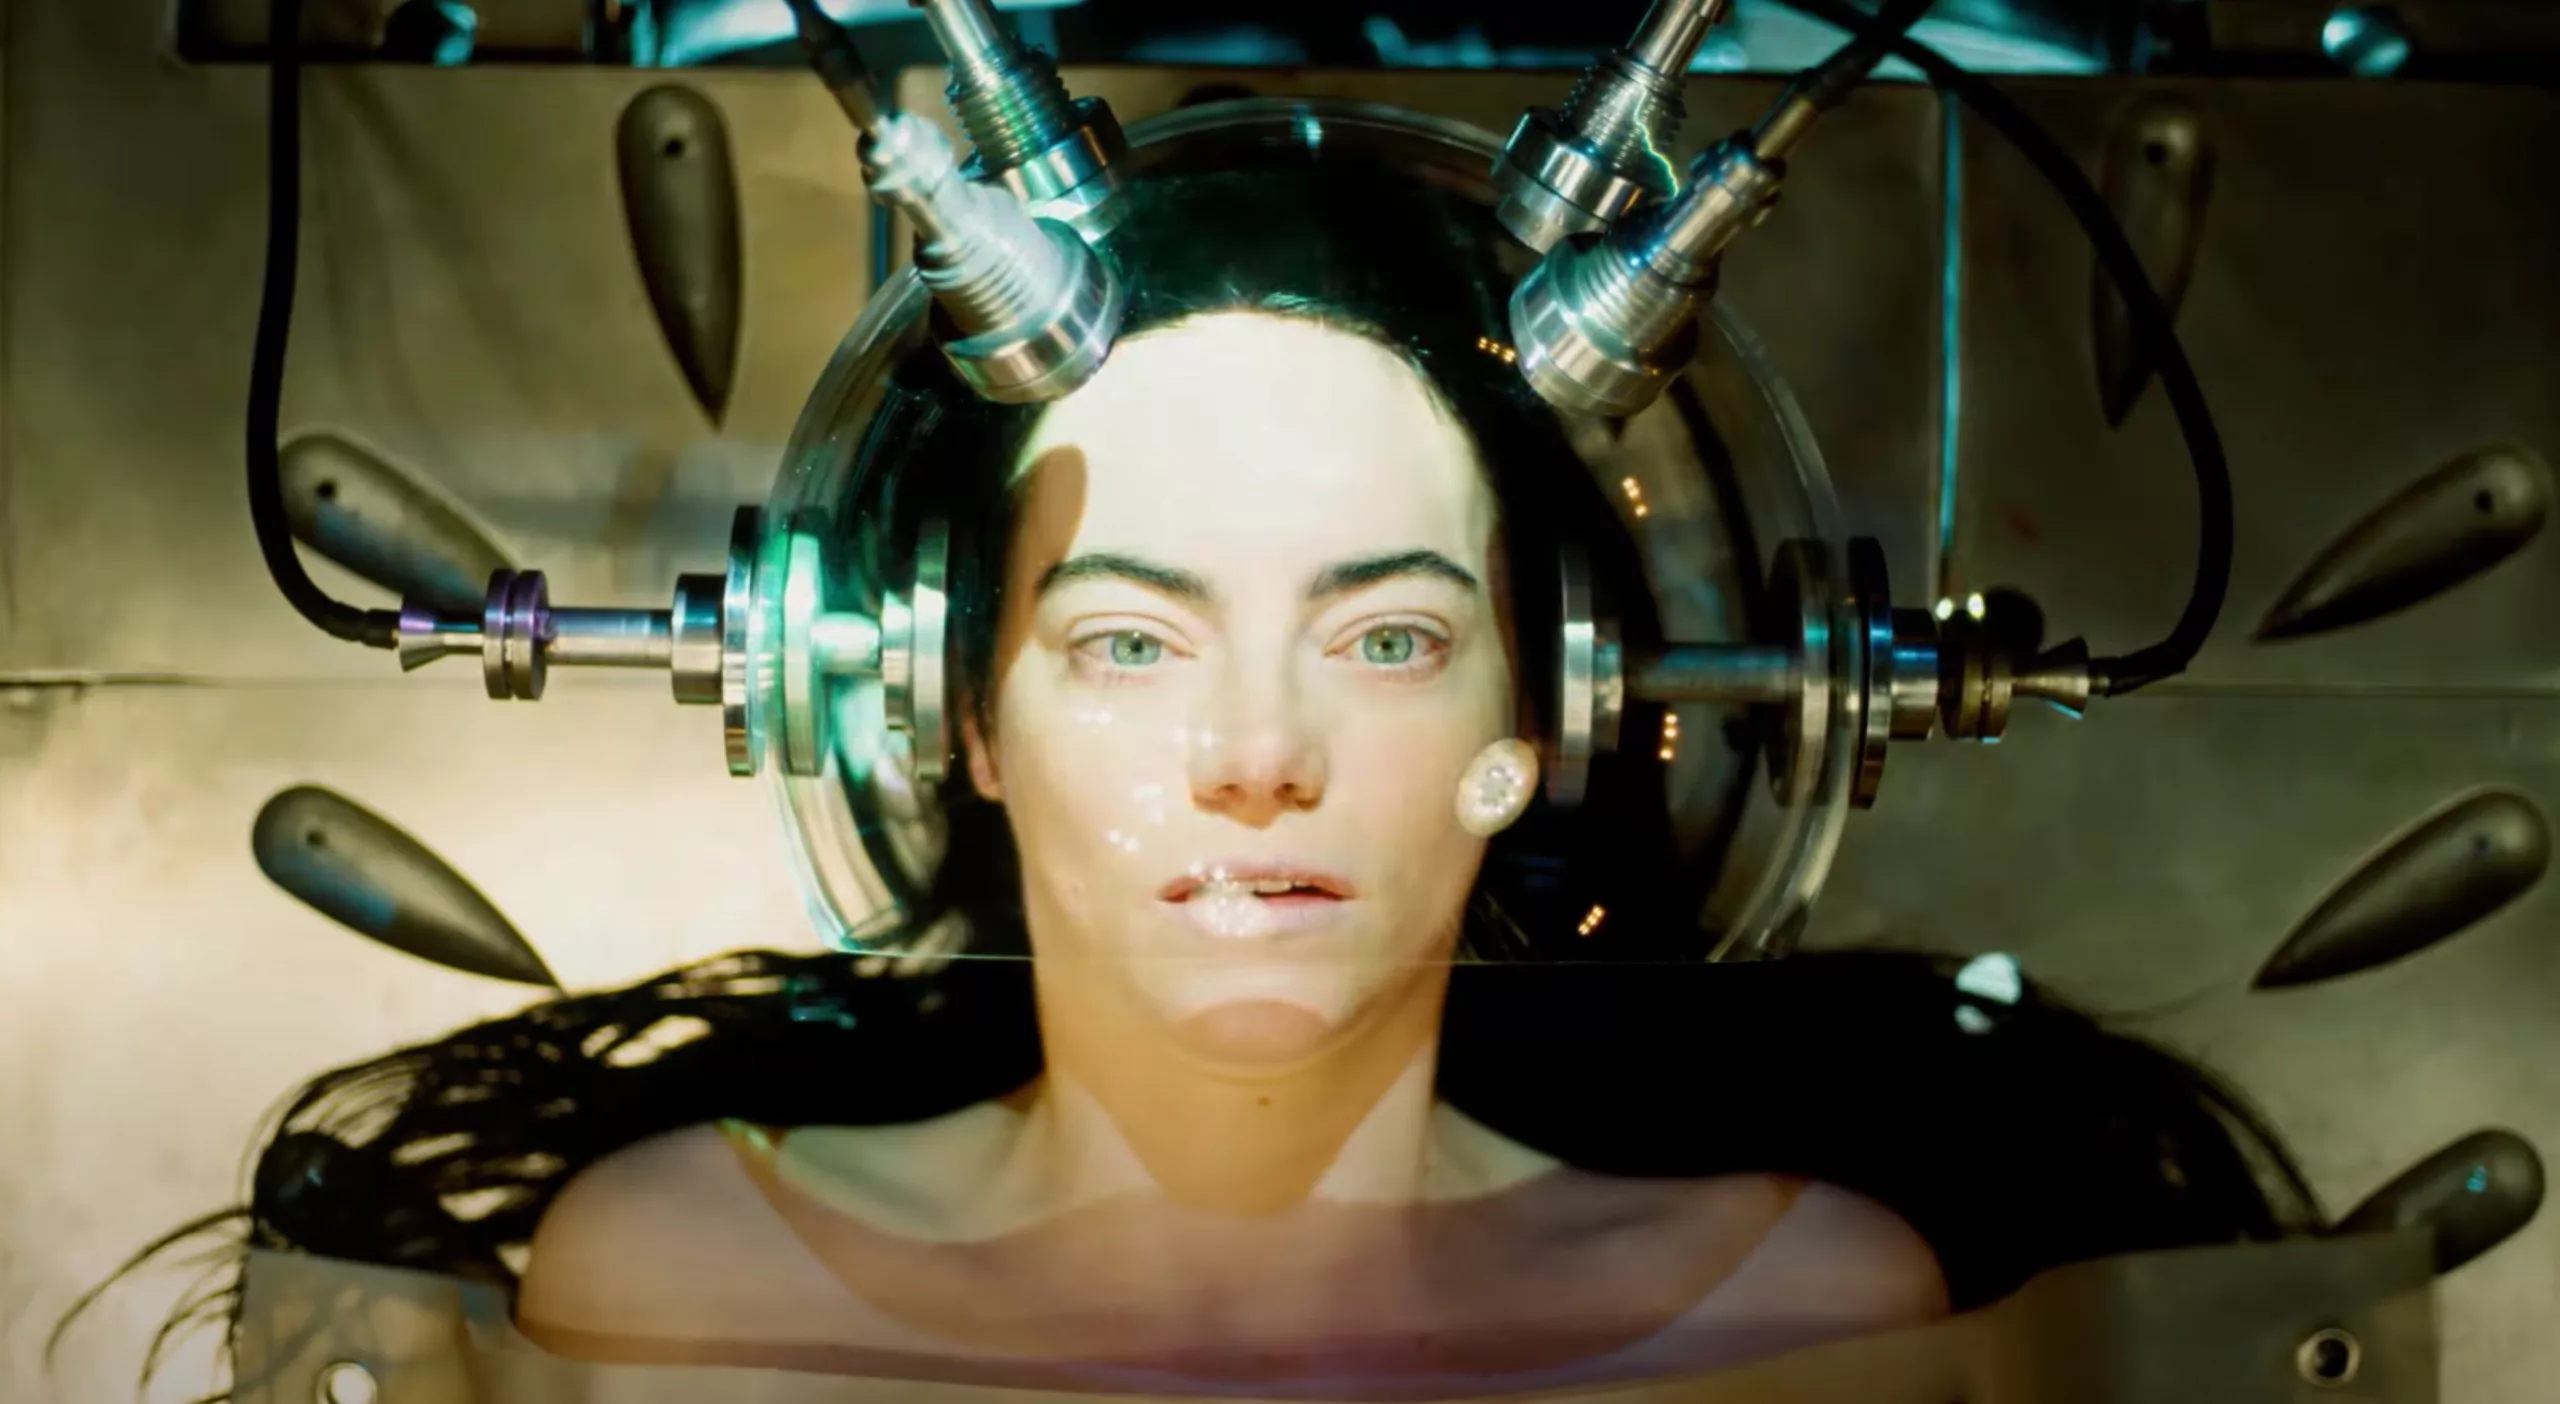 A woman looks up, eyes wide open, with her head encased in some sort of steam punk contraption on a table possibly in an operating room.